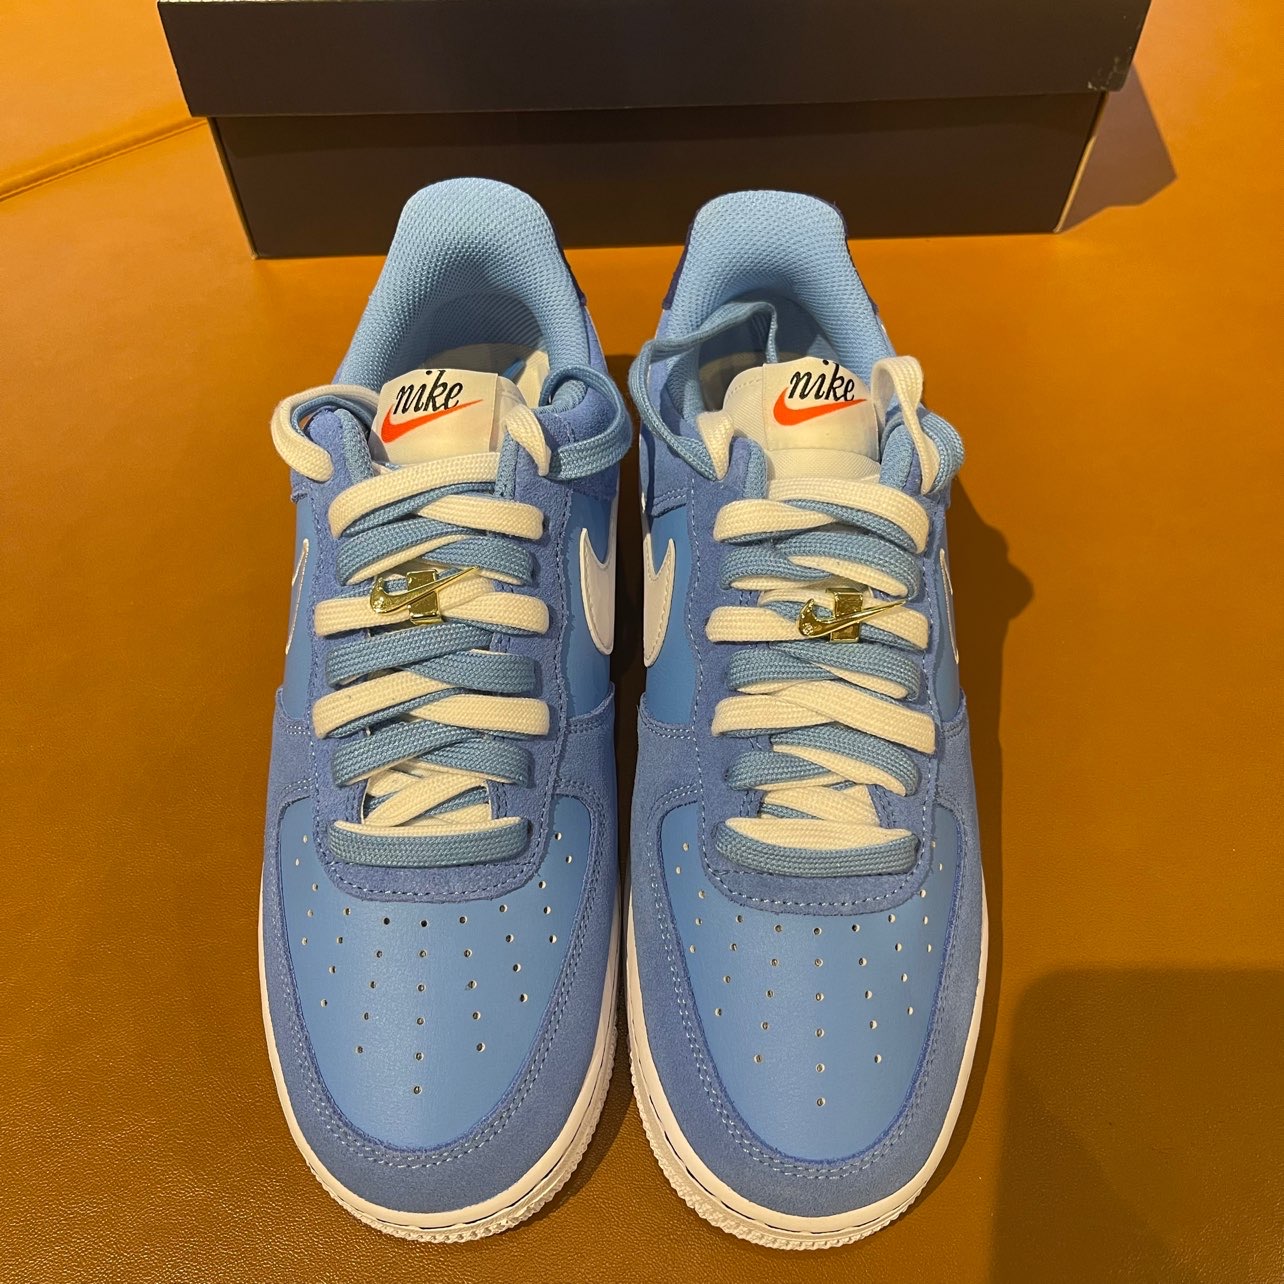 Nike Air Force 1 Low “First Use” University Blue/White For Sale ...